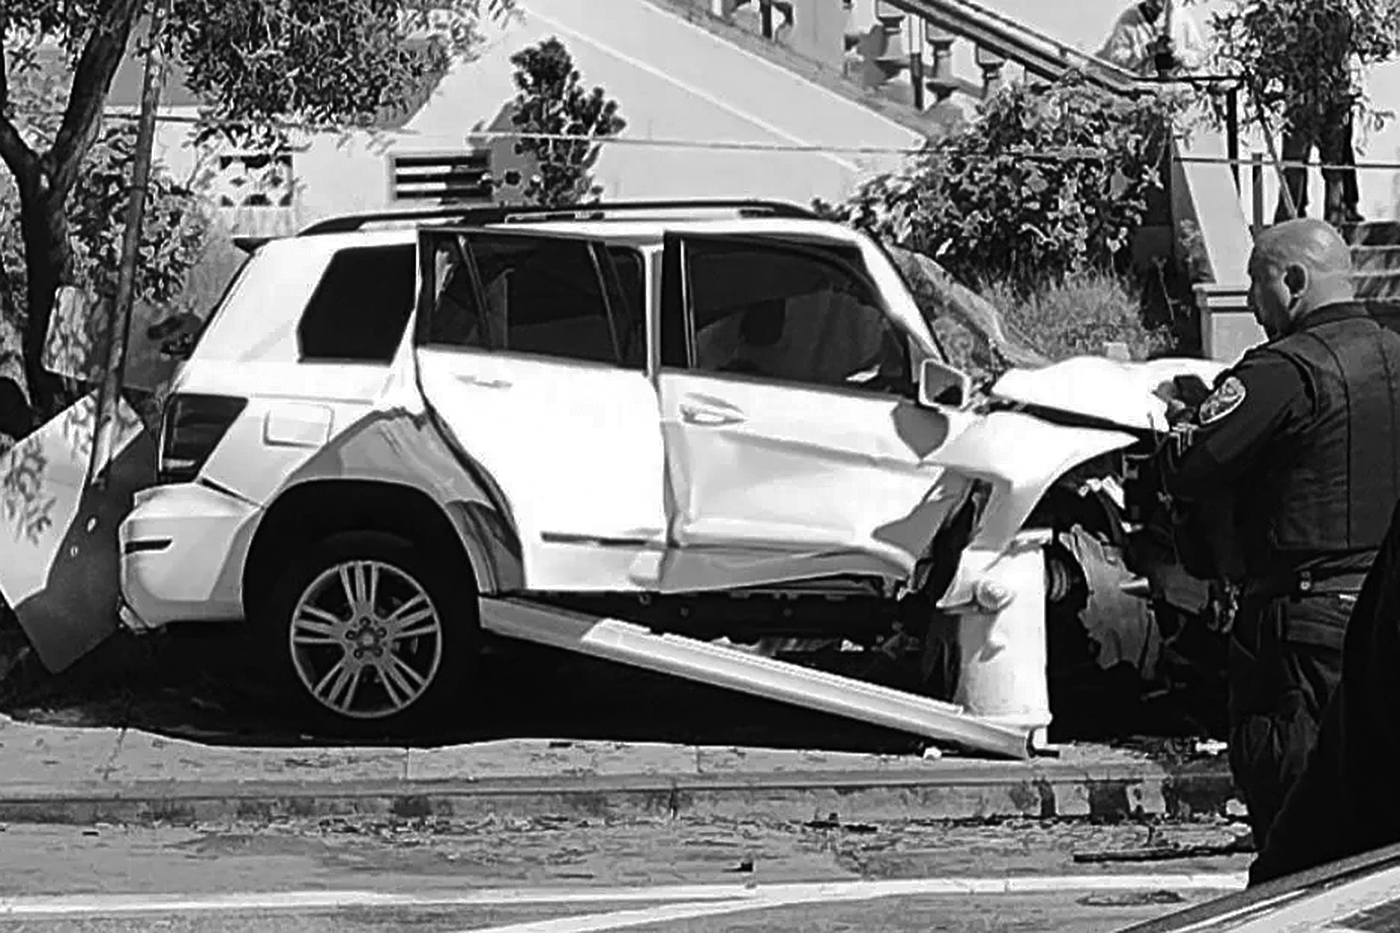 A policeman observes a severely damaged white SUV that crashed into a pole.